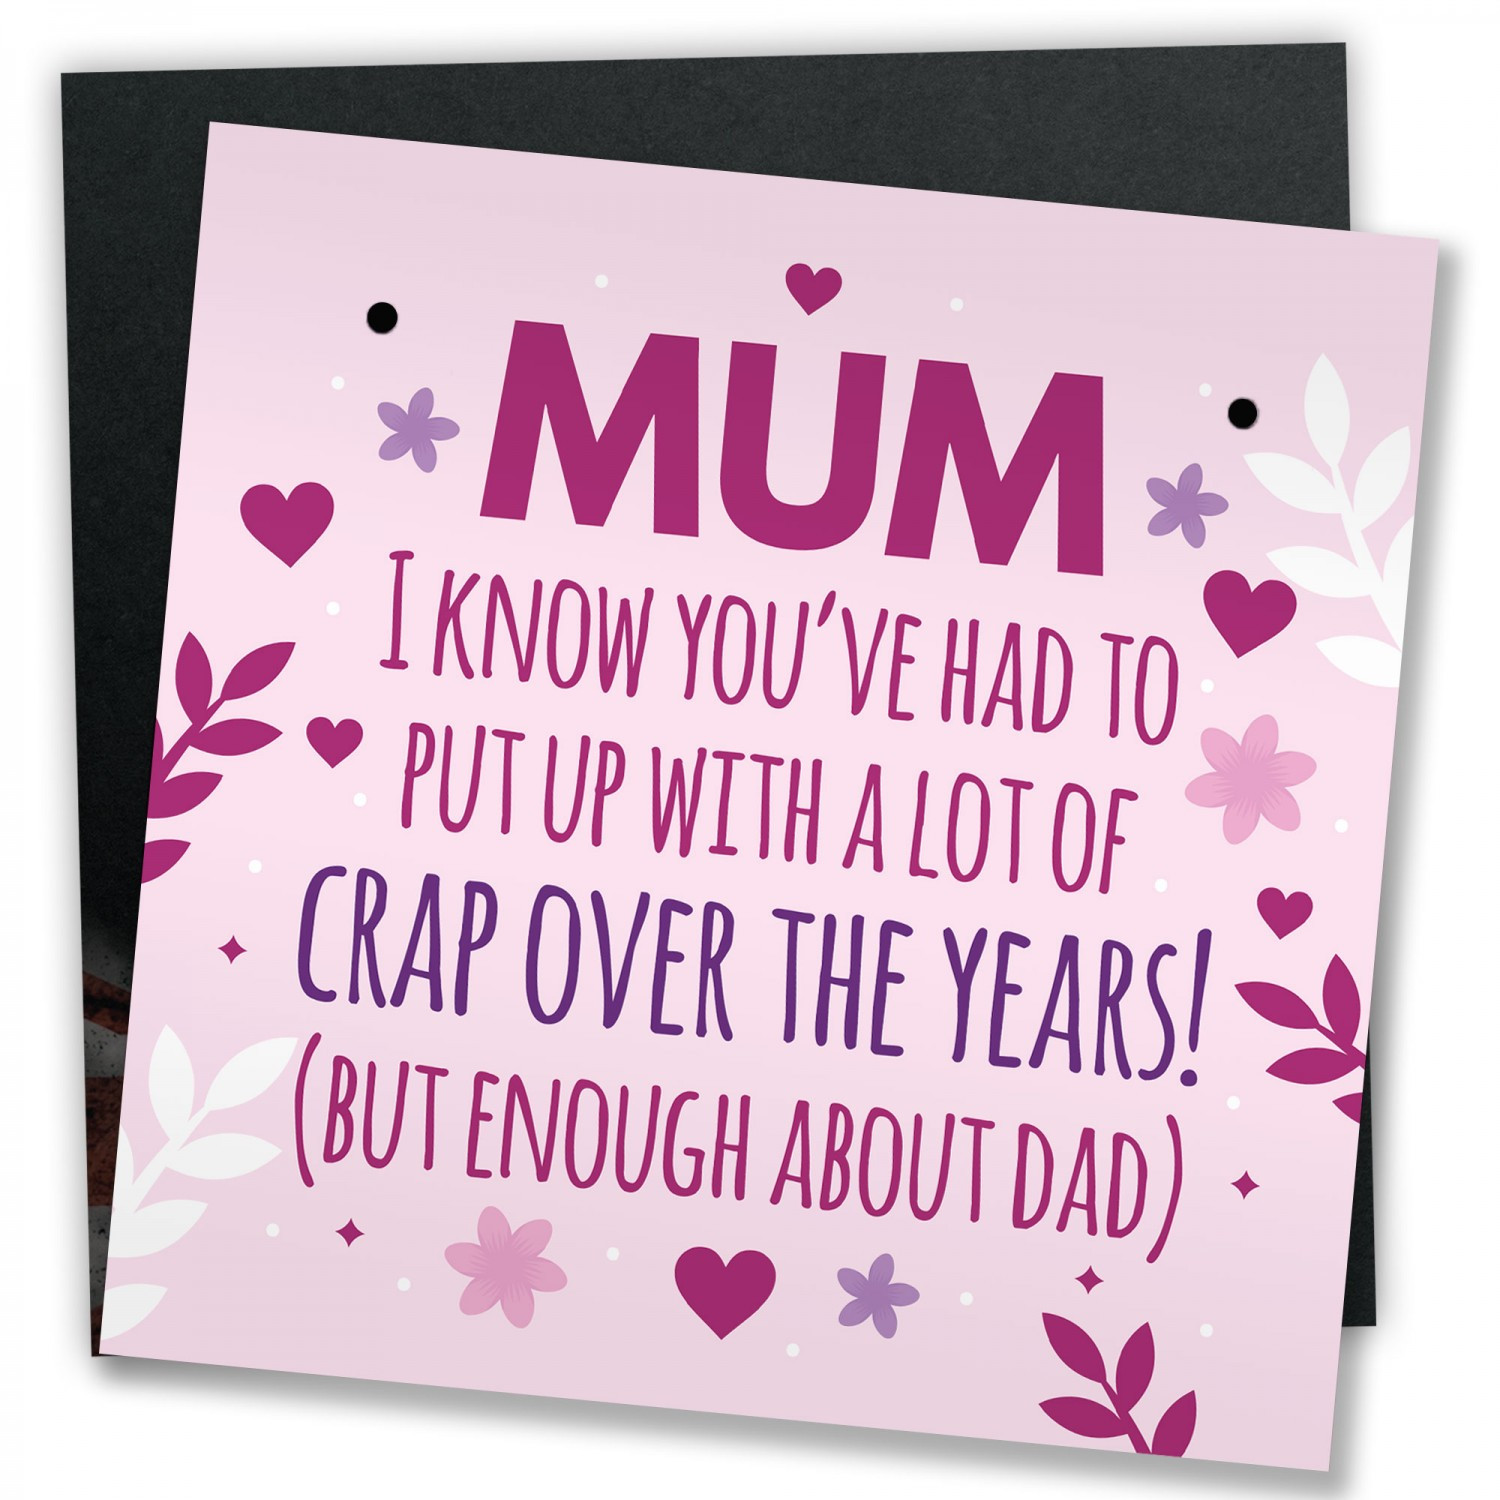 Funny Birthday Cards For Mom From Daughter
 Funny Mum Birthday Card Funny Mothers Day Card From Daughter